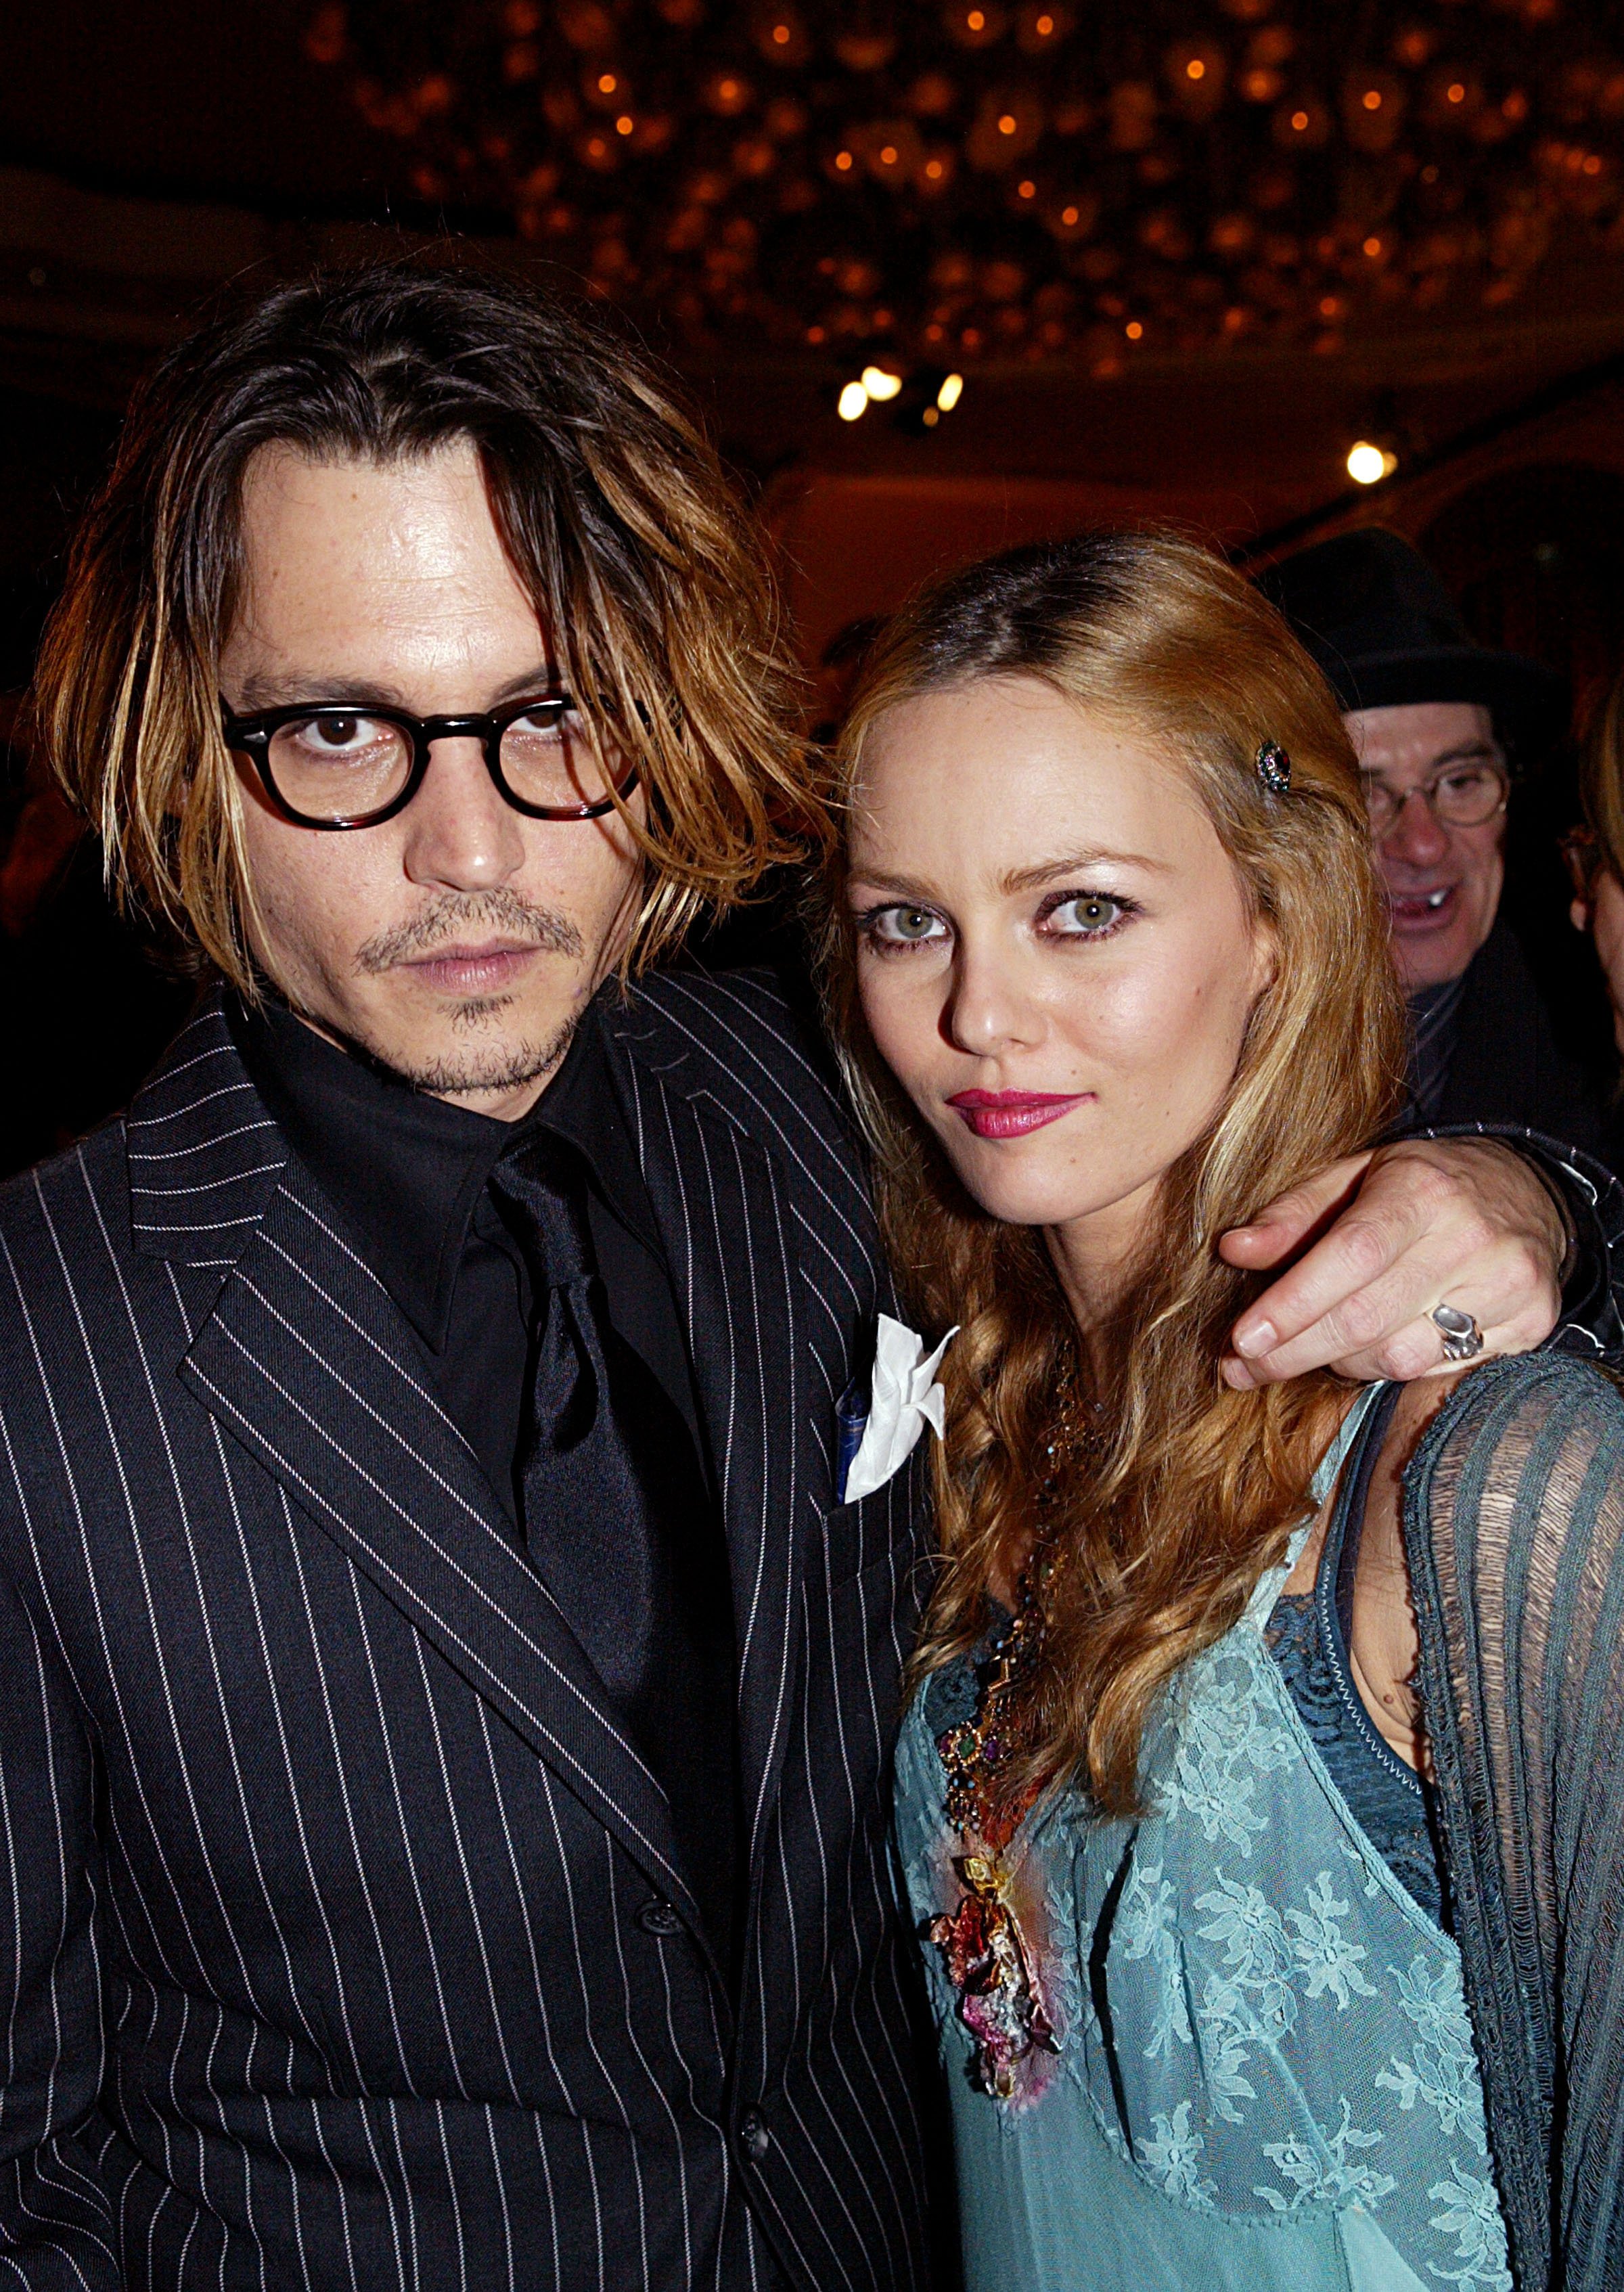 Johnny Depp and Vanessa Paradis at the 9th Annual Critics Choice Awards | Source: Getty Images